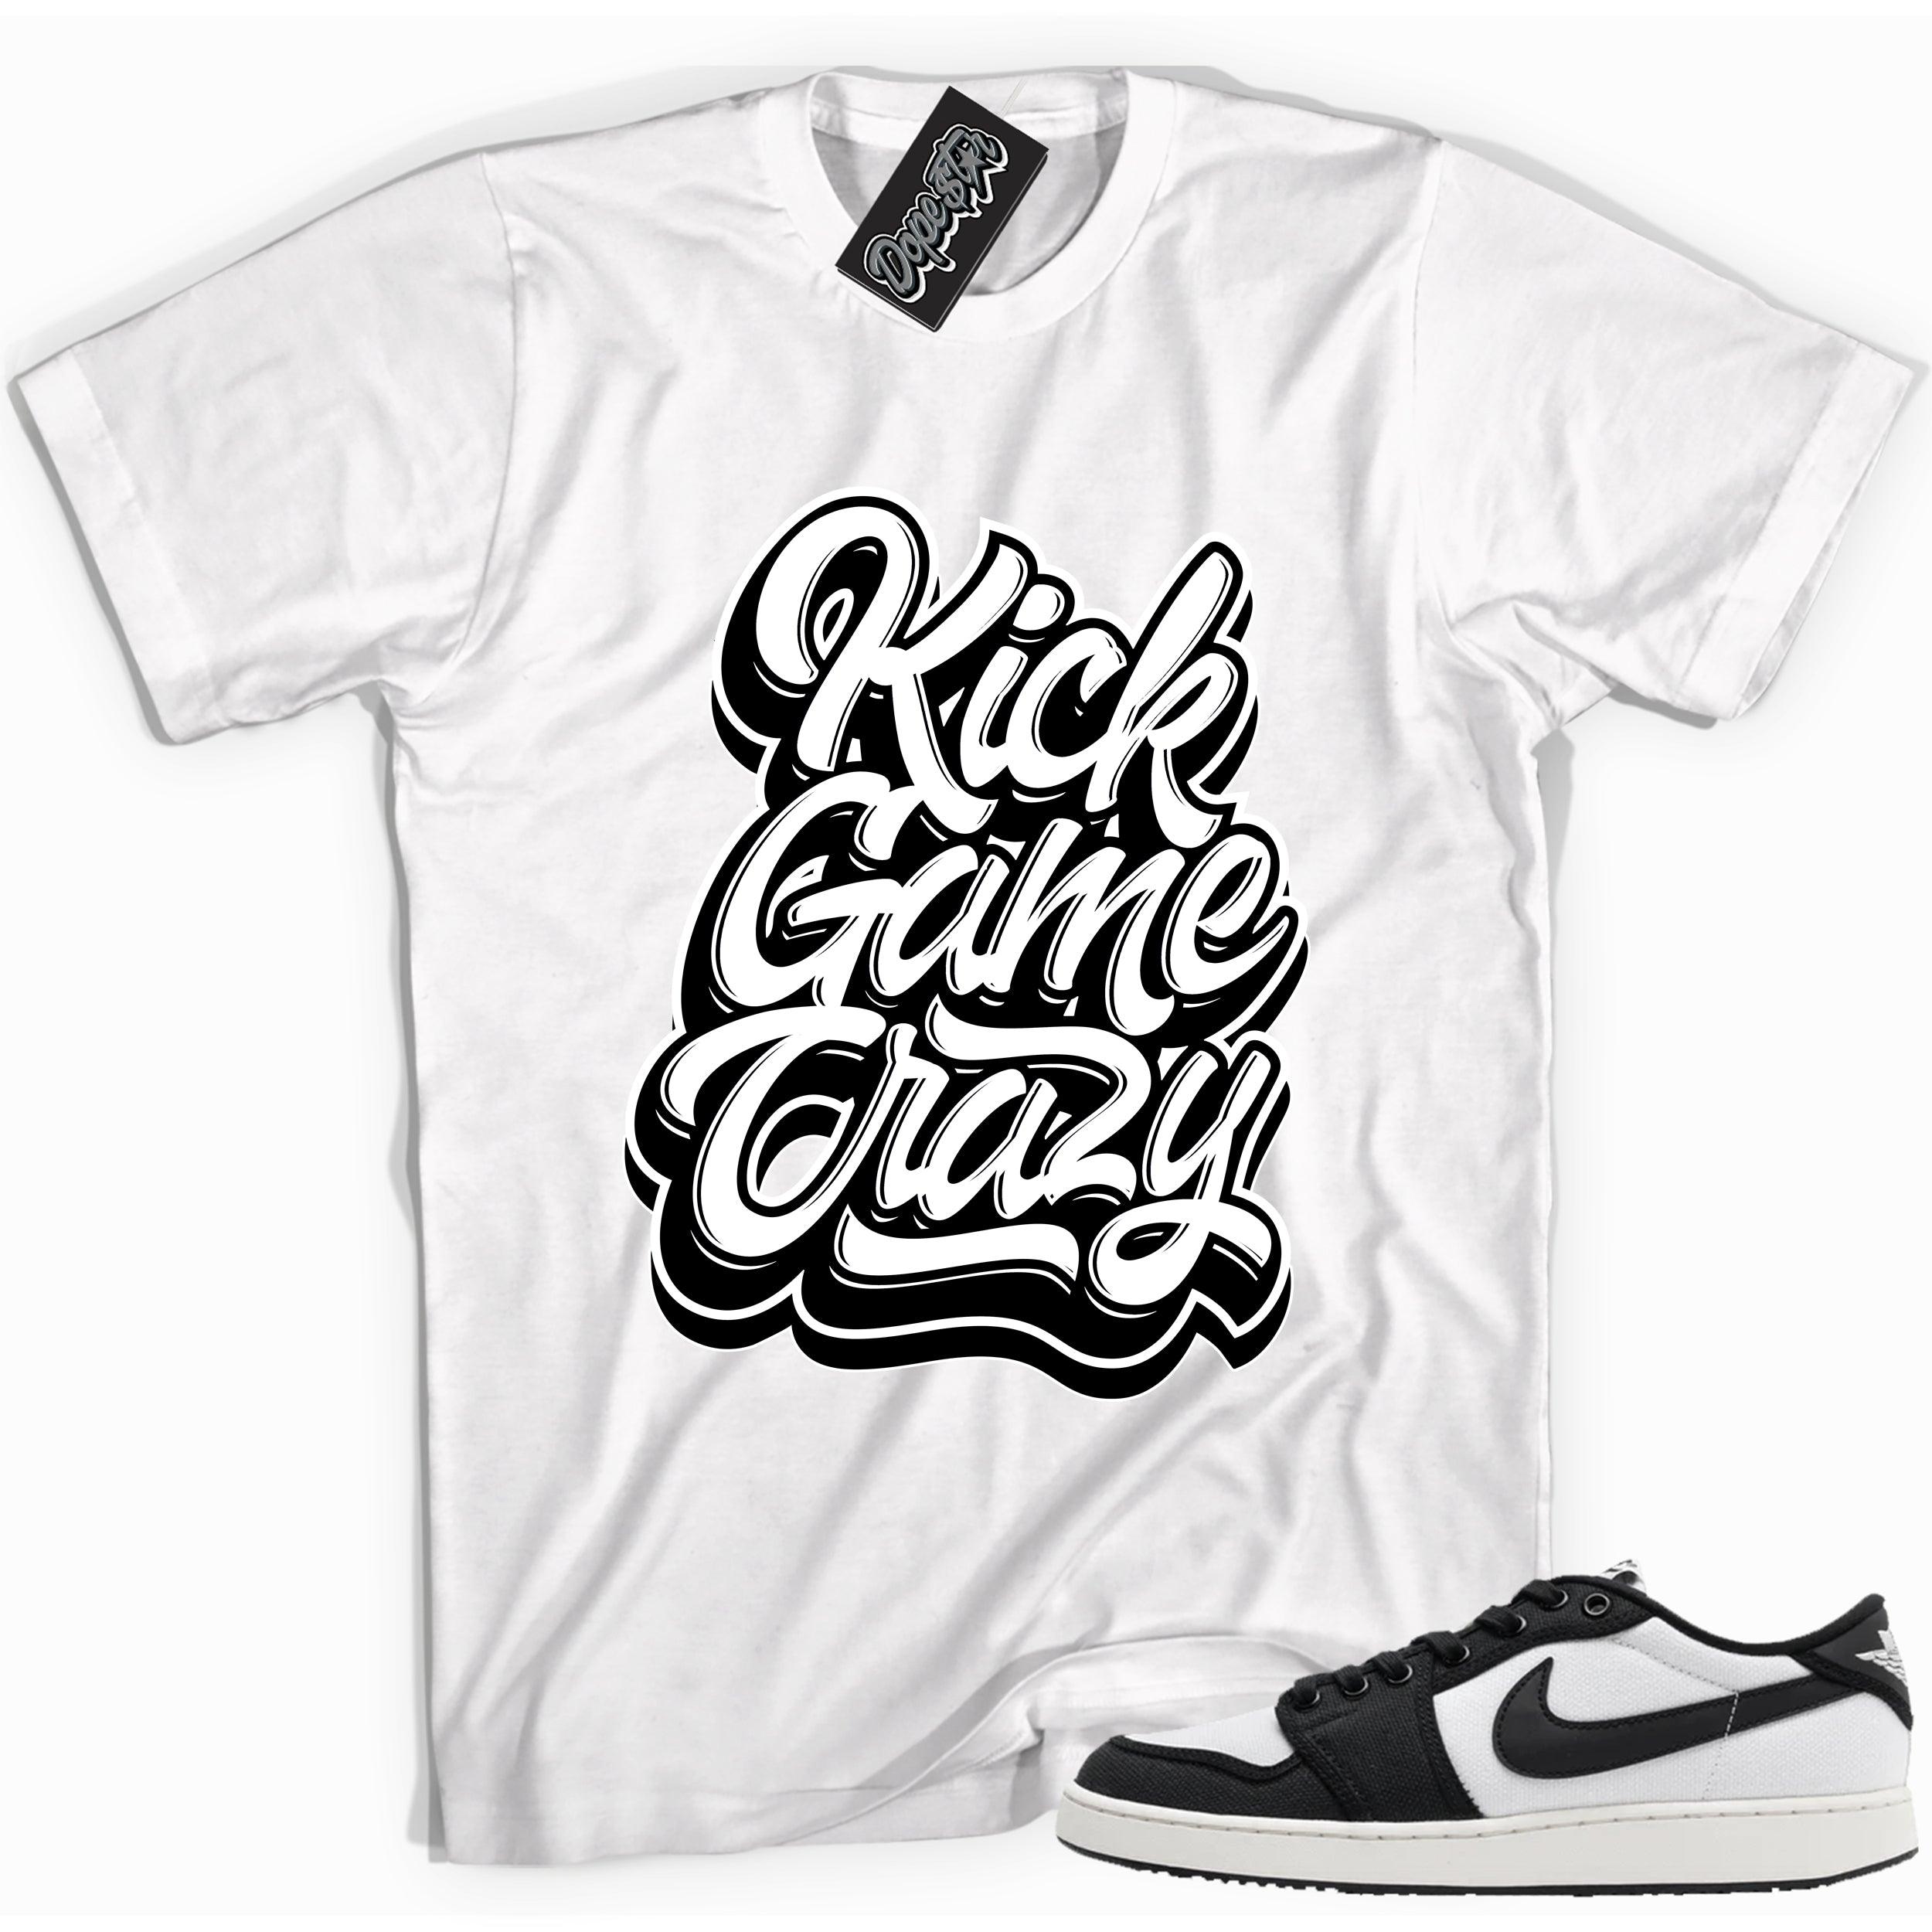 Cool white graphic tee with 'kick game crazy' print, that perfectly matches Air Jordan 1 Retro Ajko Low Black & White sneakers.